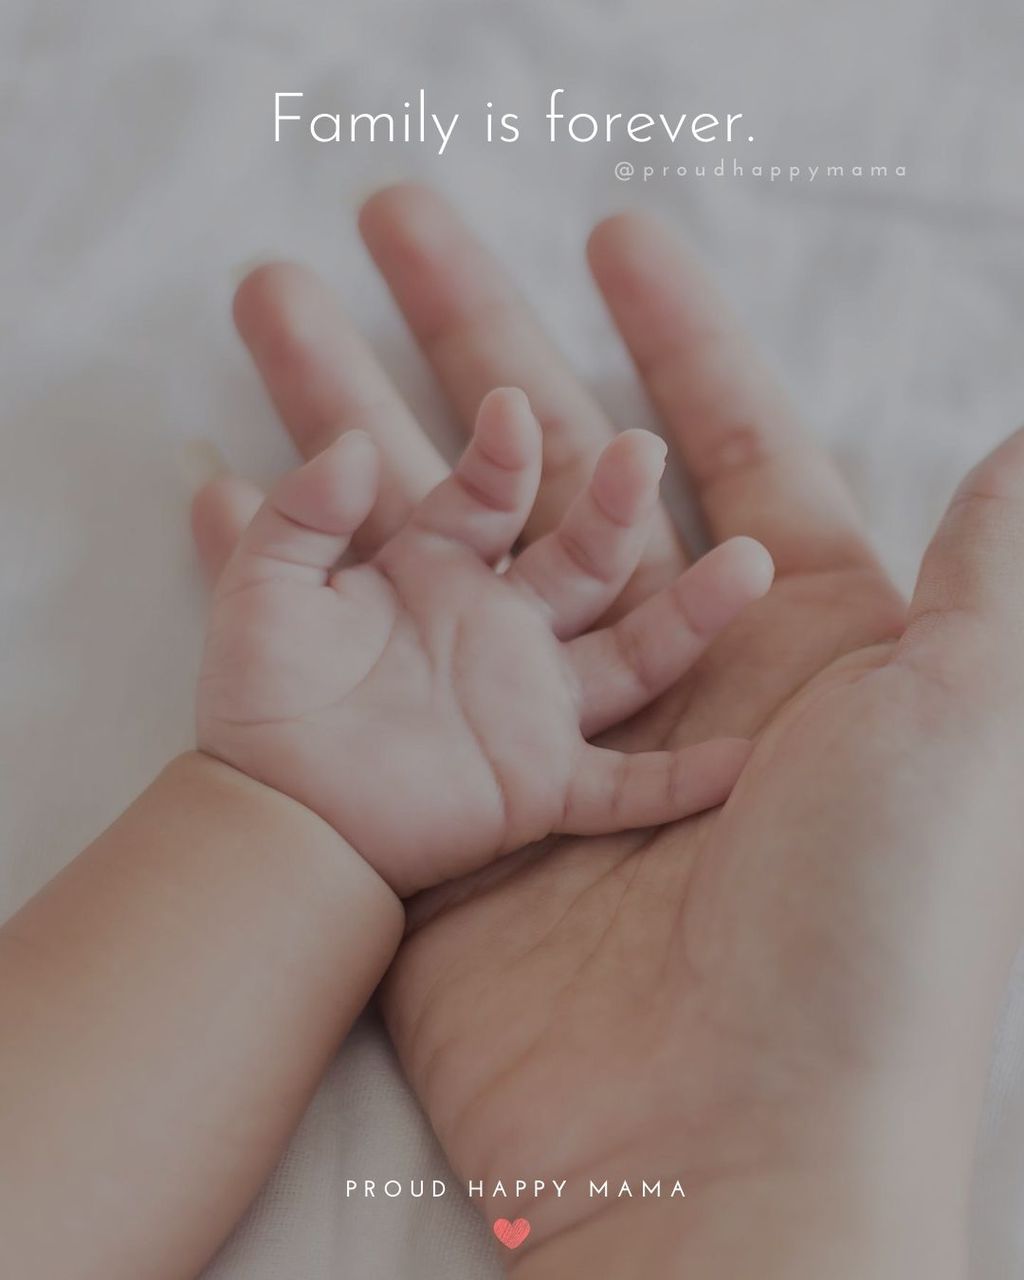 Short Quotes About Family | Family is forever.